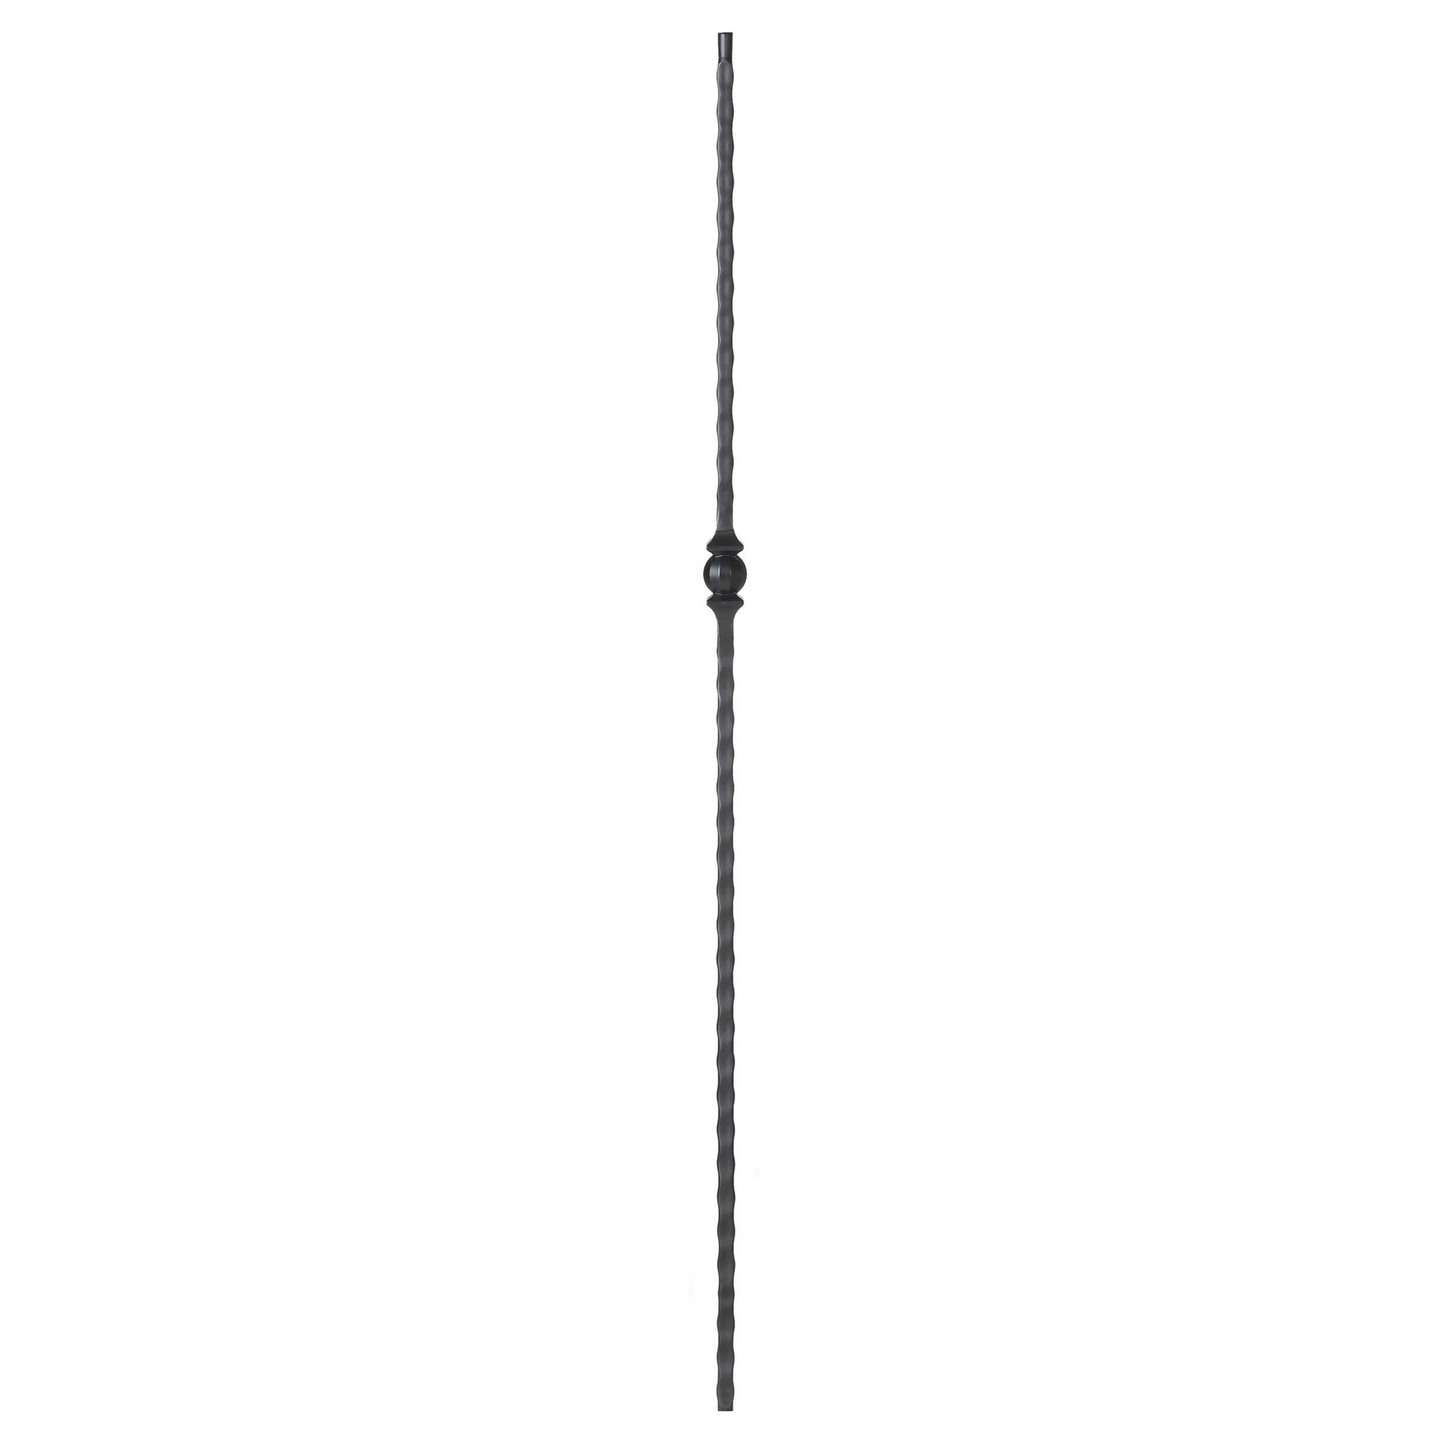 Hammered Tapered Single Ball Iron Baluster